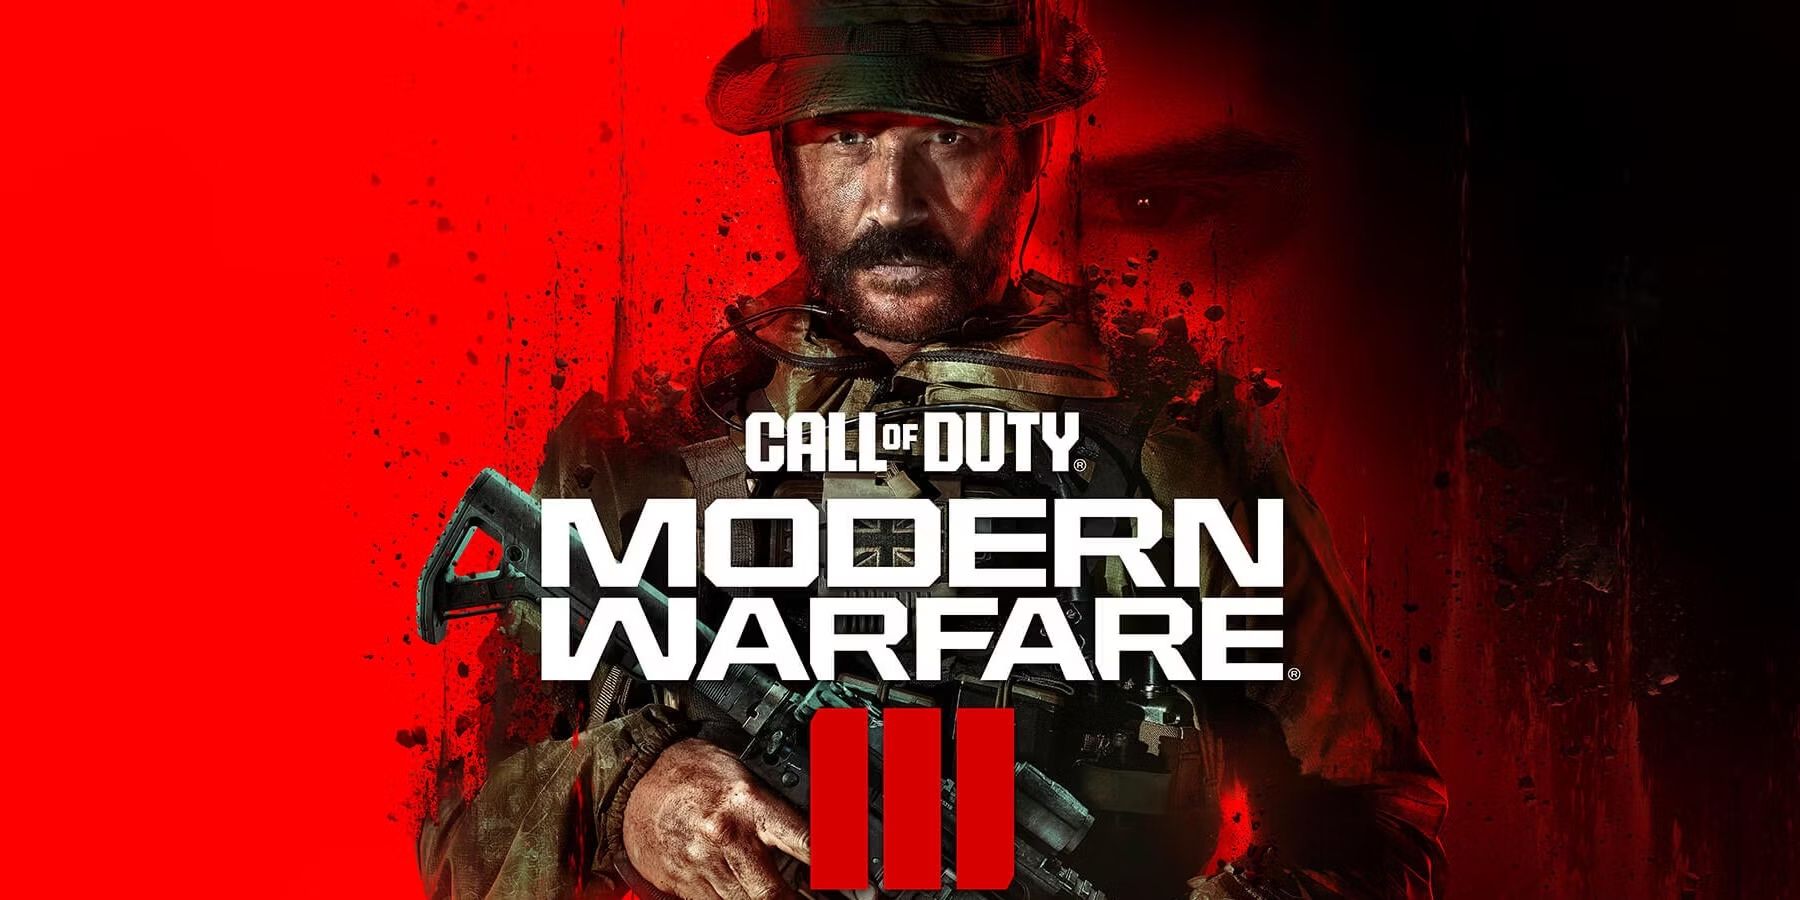 Modern Warfare 3 TTK: How does it compare to MW2, MW2019 & older COD games?  - Dexerto